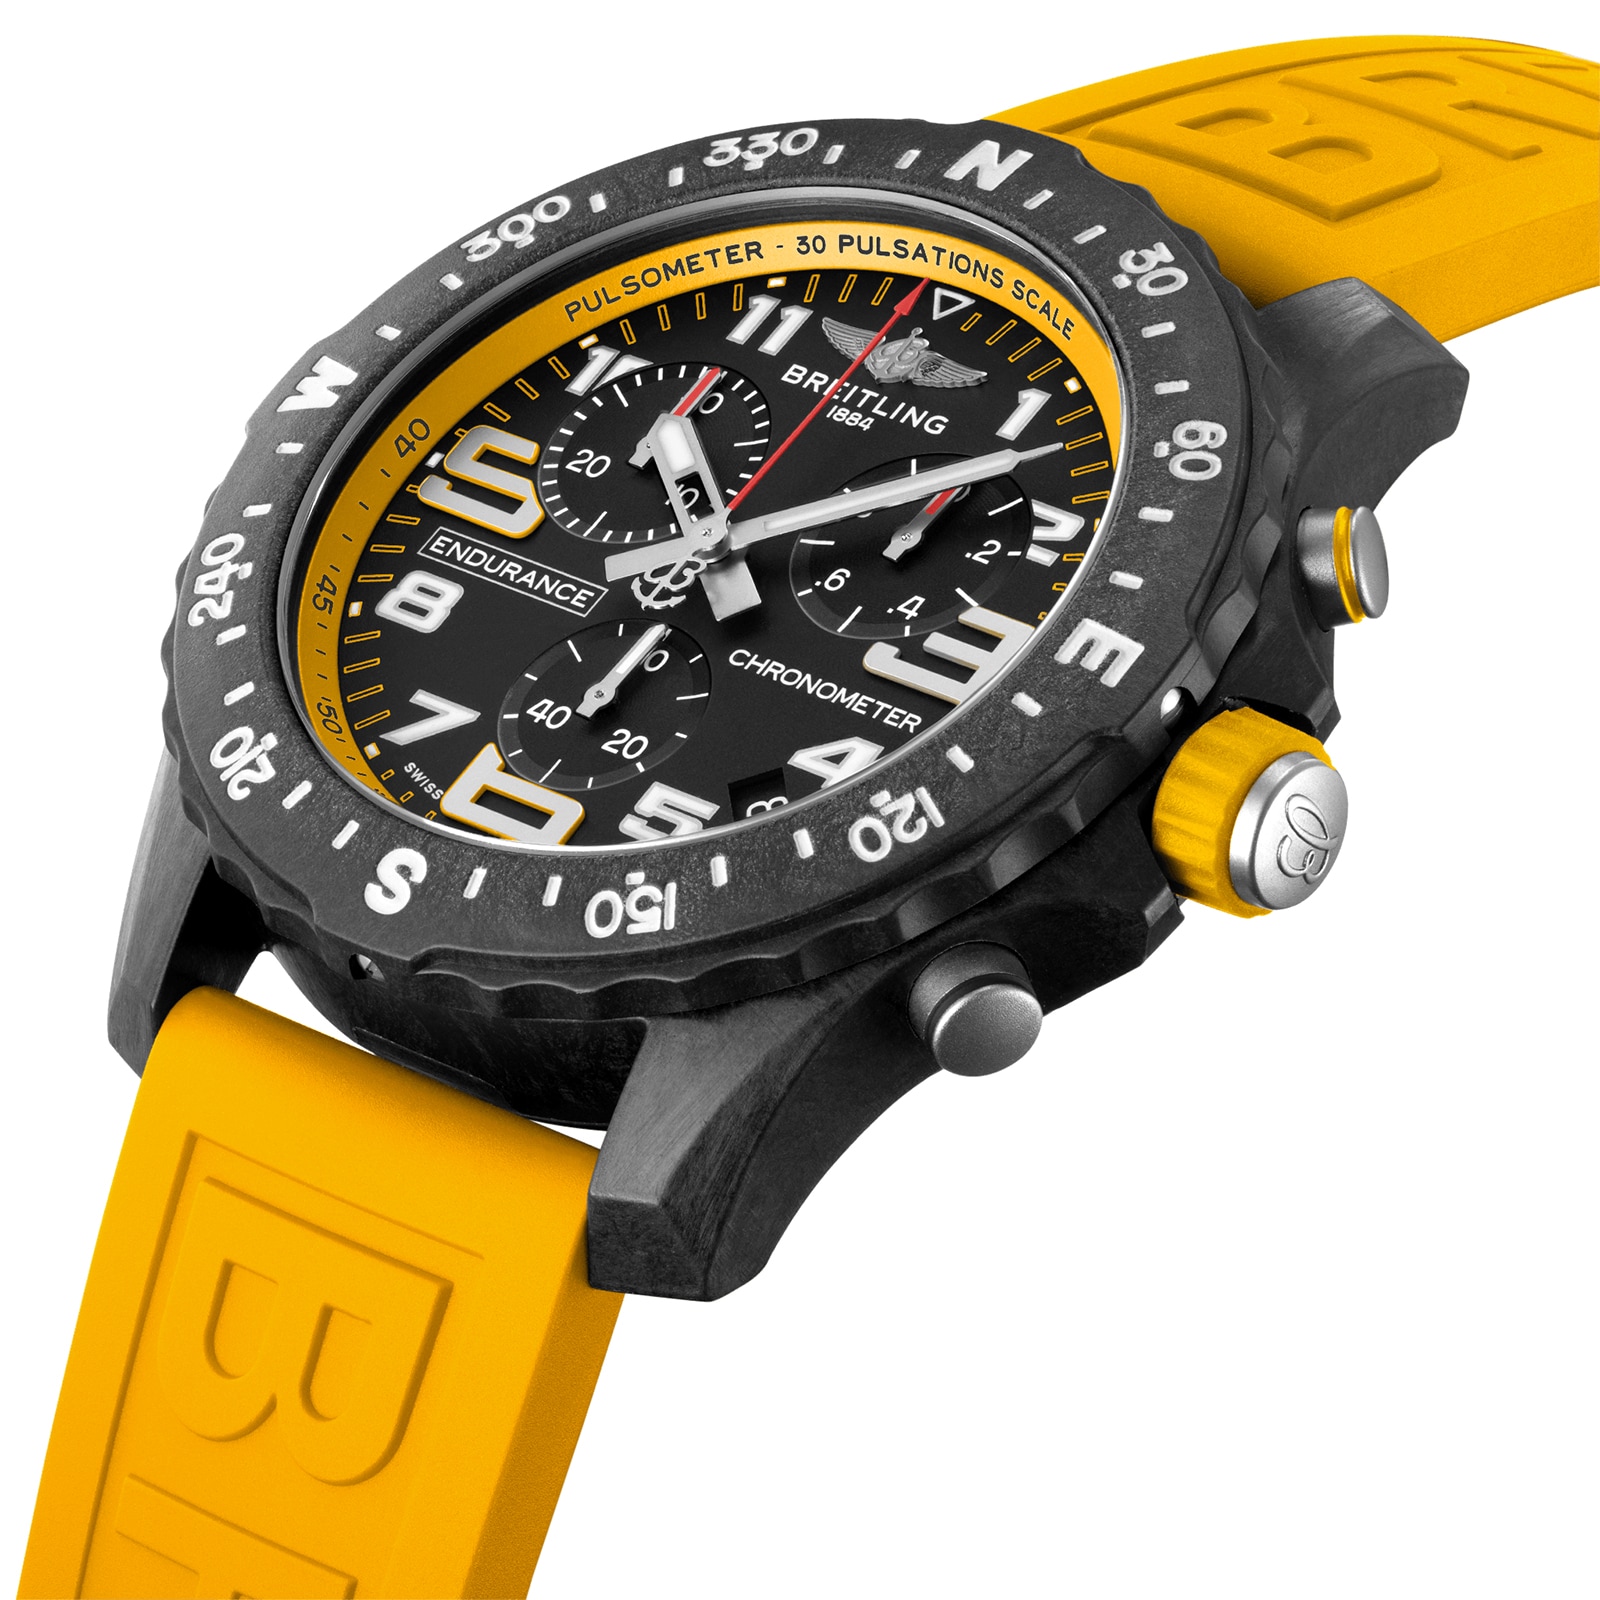 Breitling Endurance Pro 44 Yellow Rubber Strap Watch X82310A41B1S1 ...